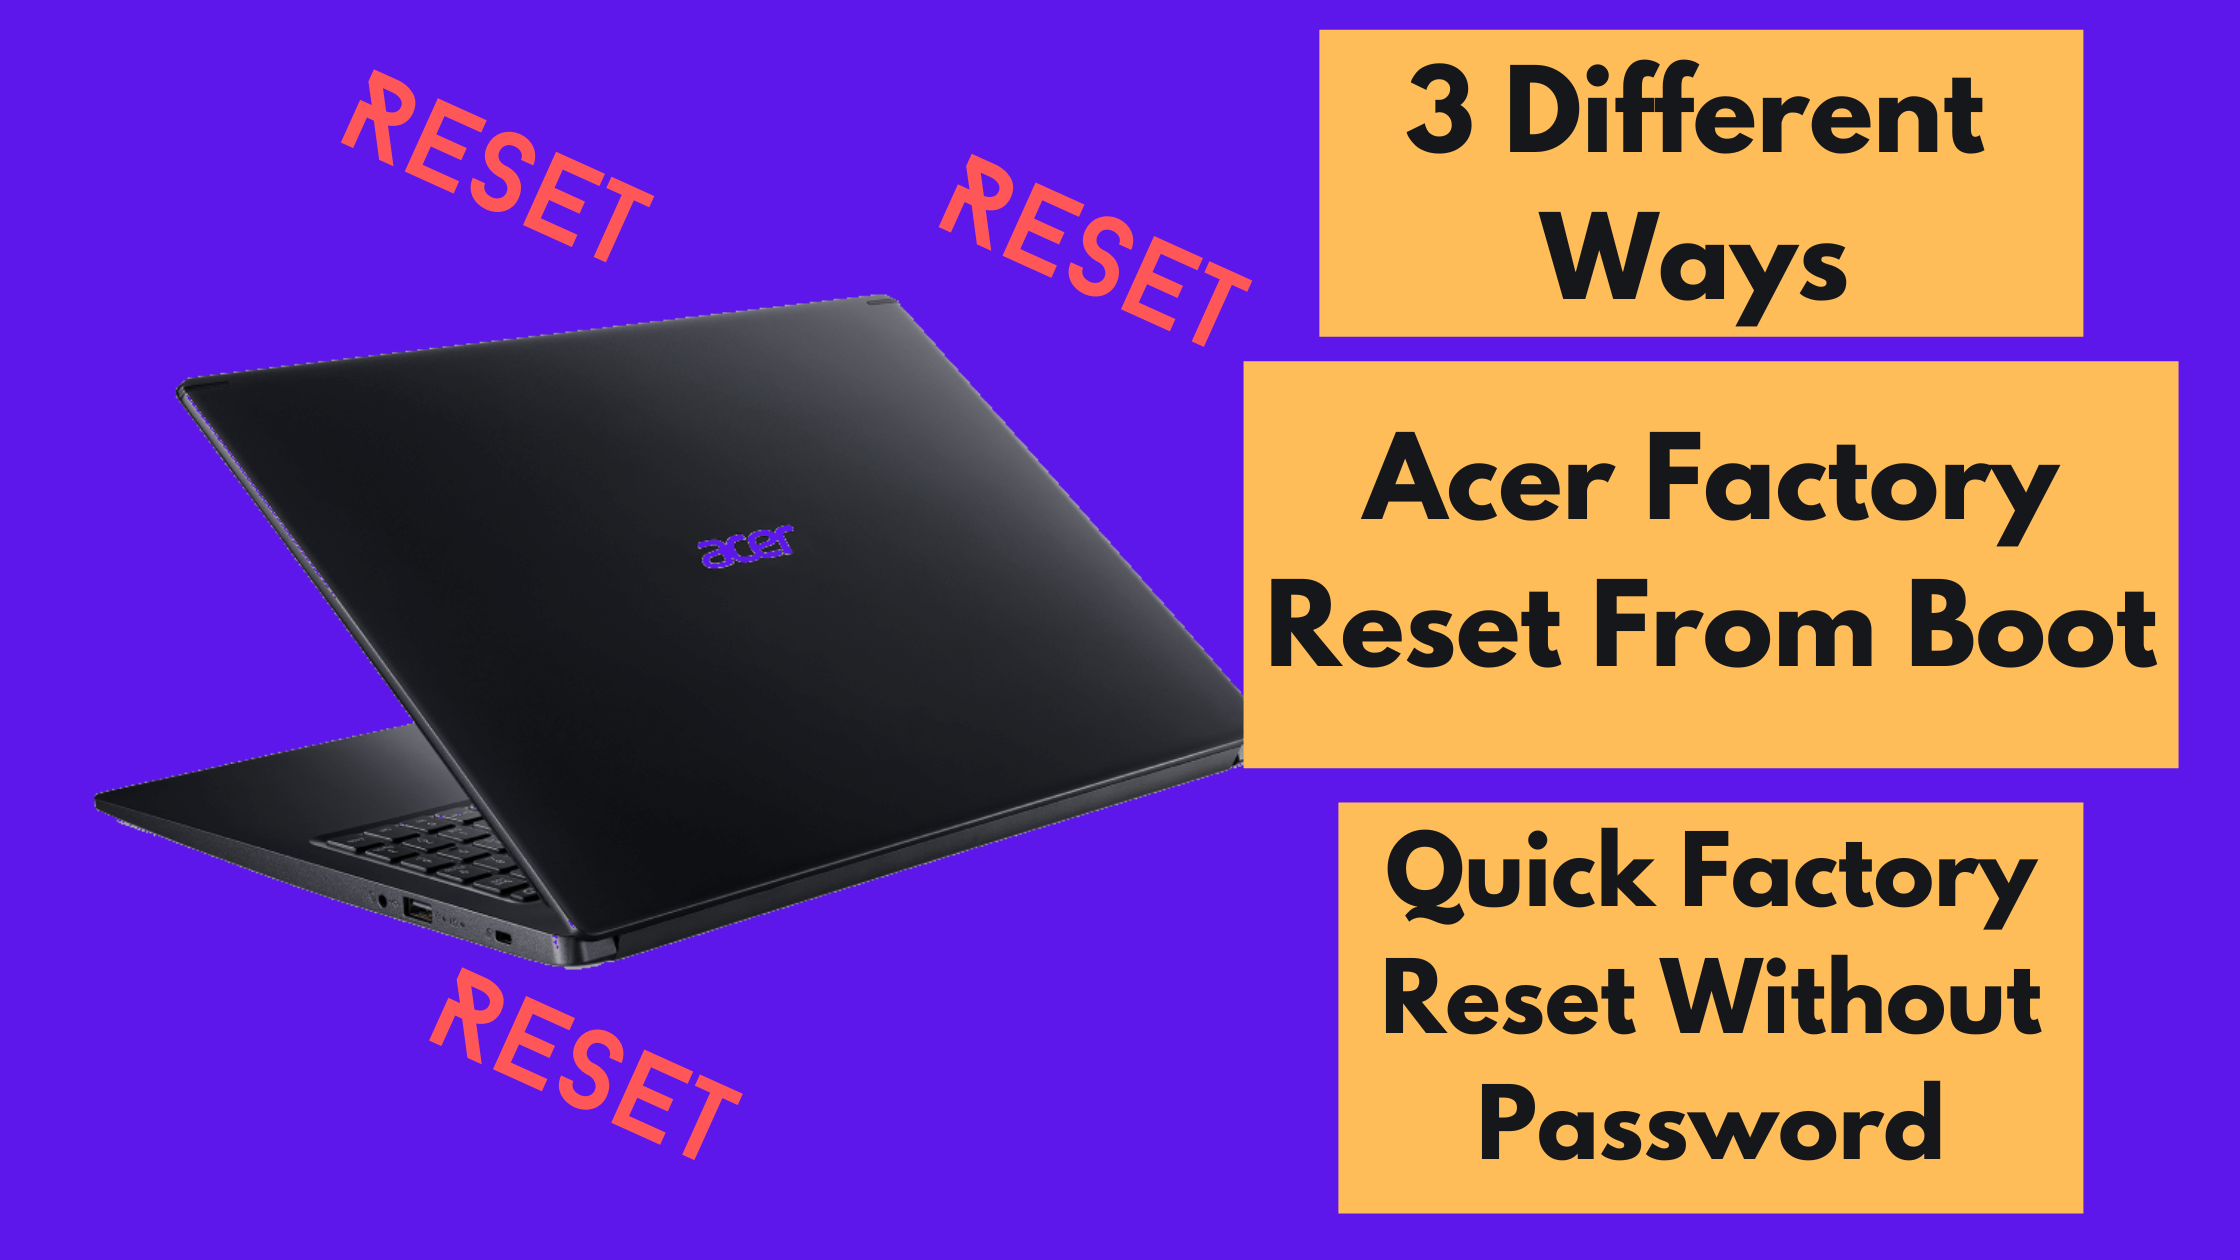 3 Methods Acer Factory Reset From Boot without turning on Acer Laptop